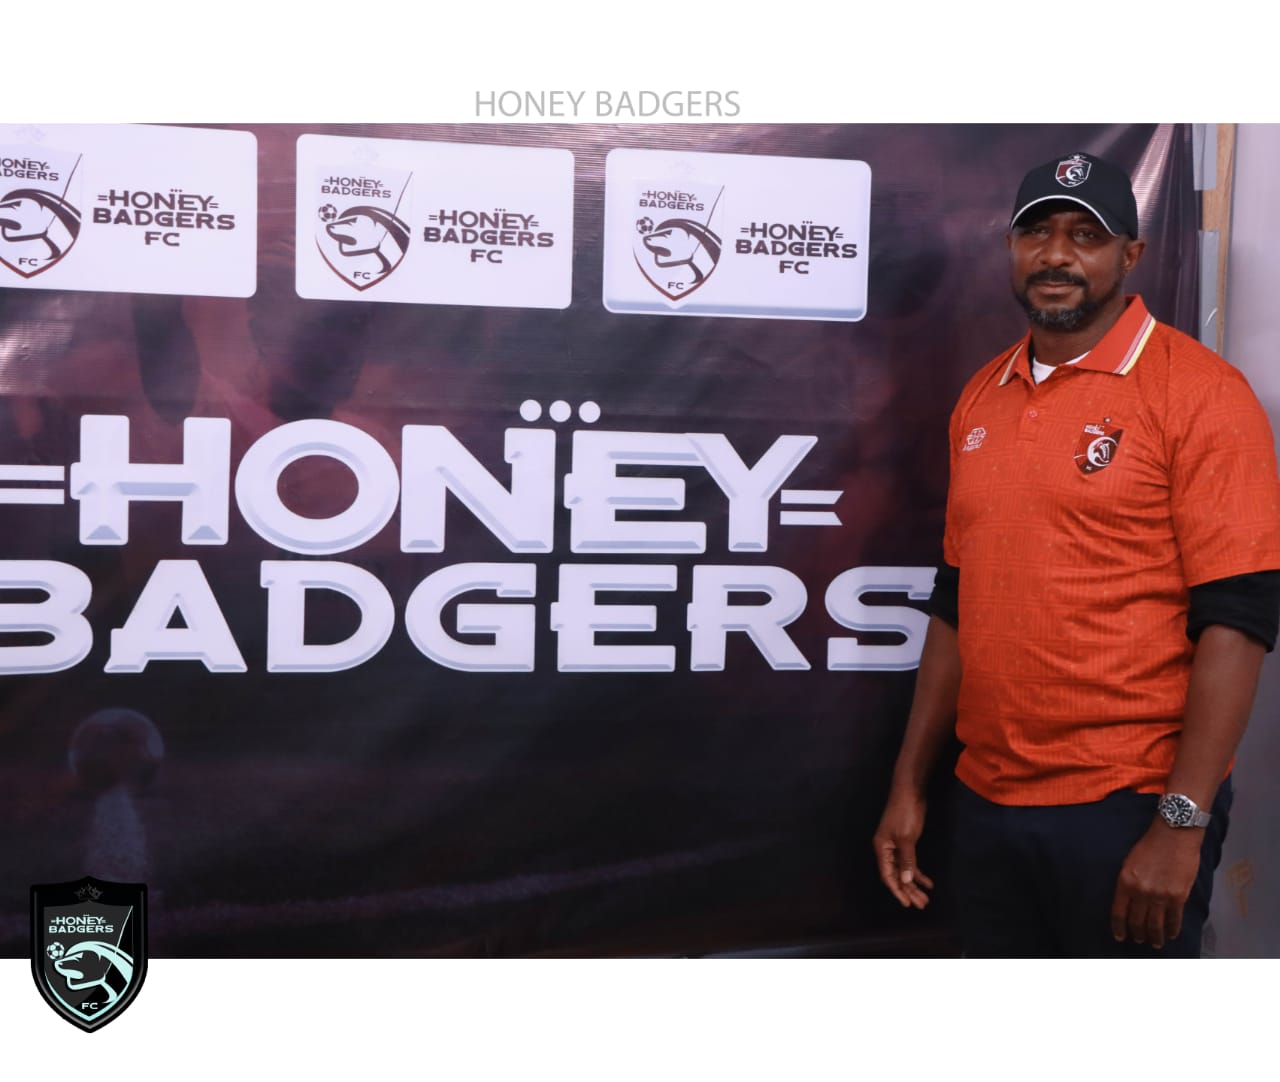 Honey Badgers Appoints Former Confluence Queens Boss As Chairman